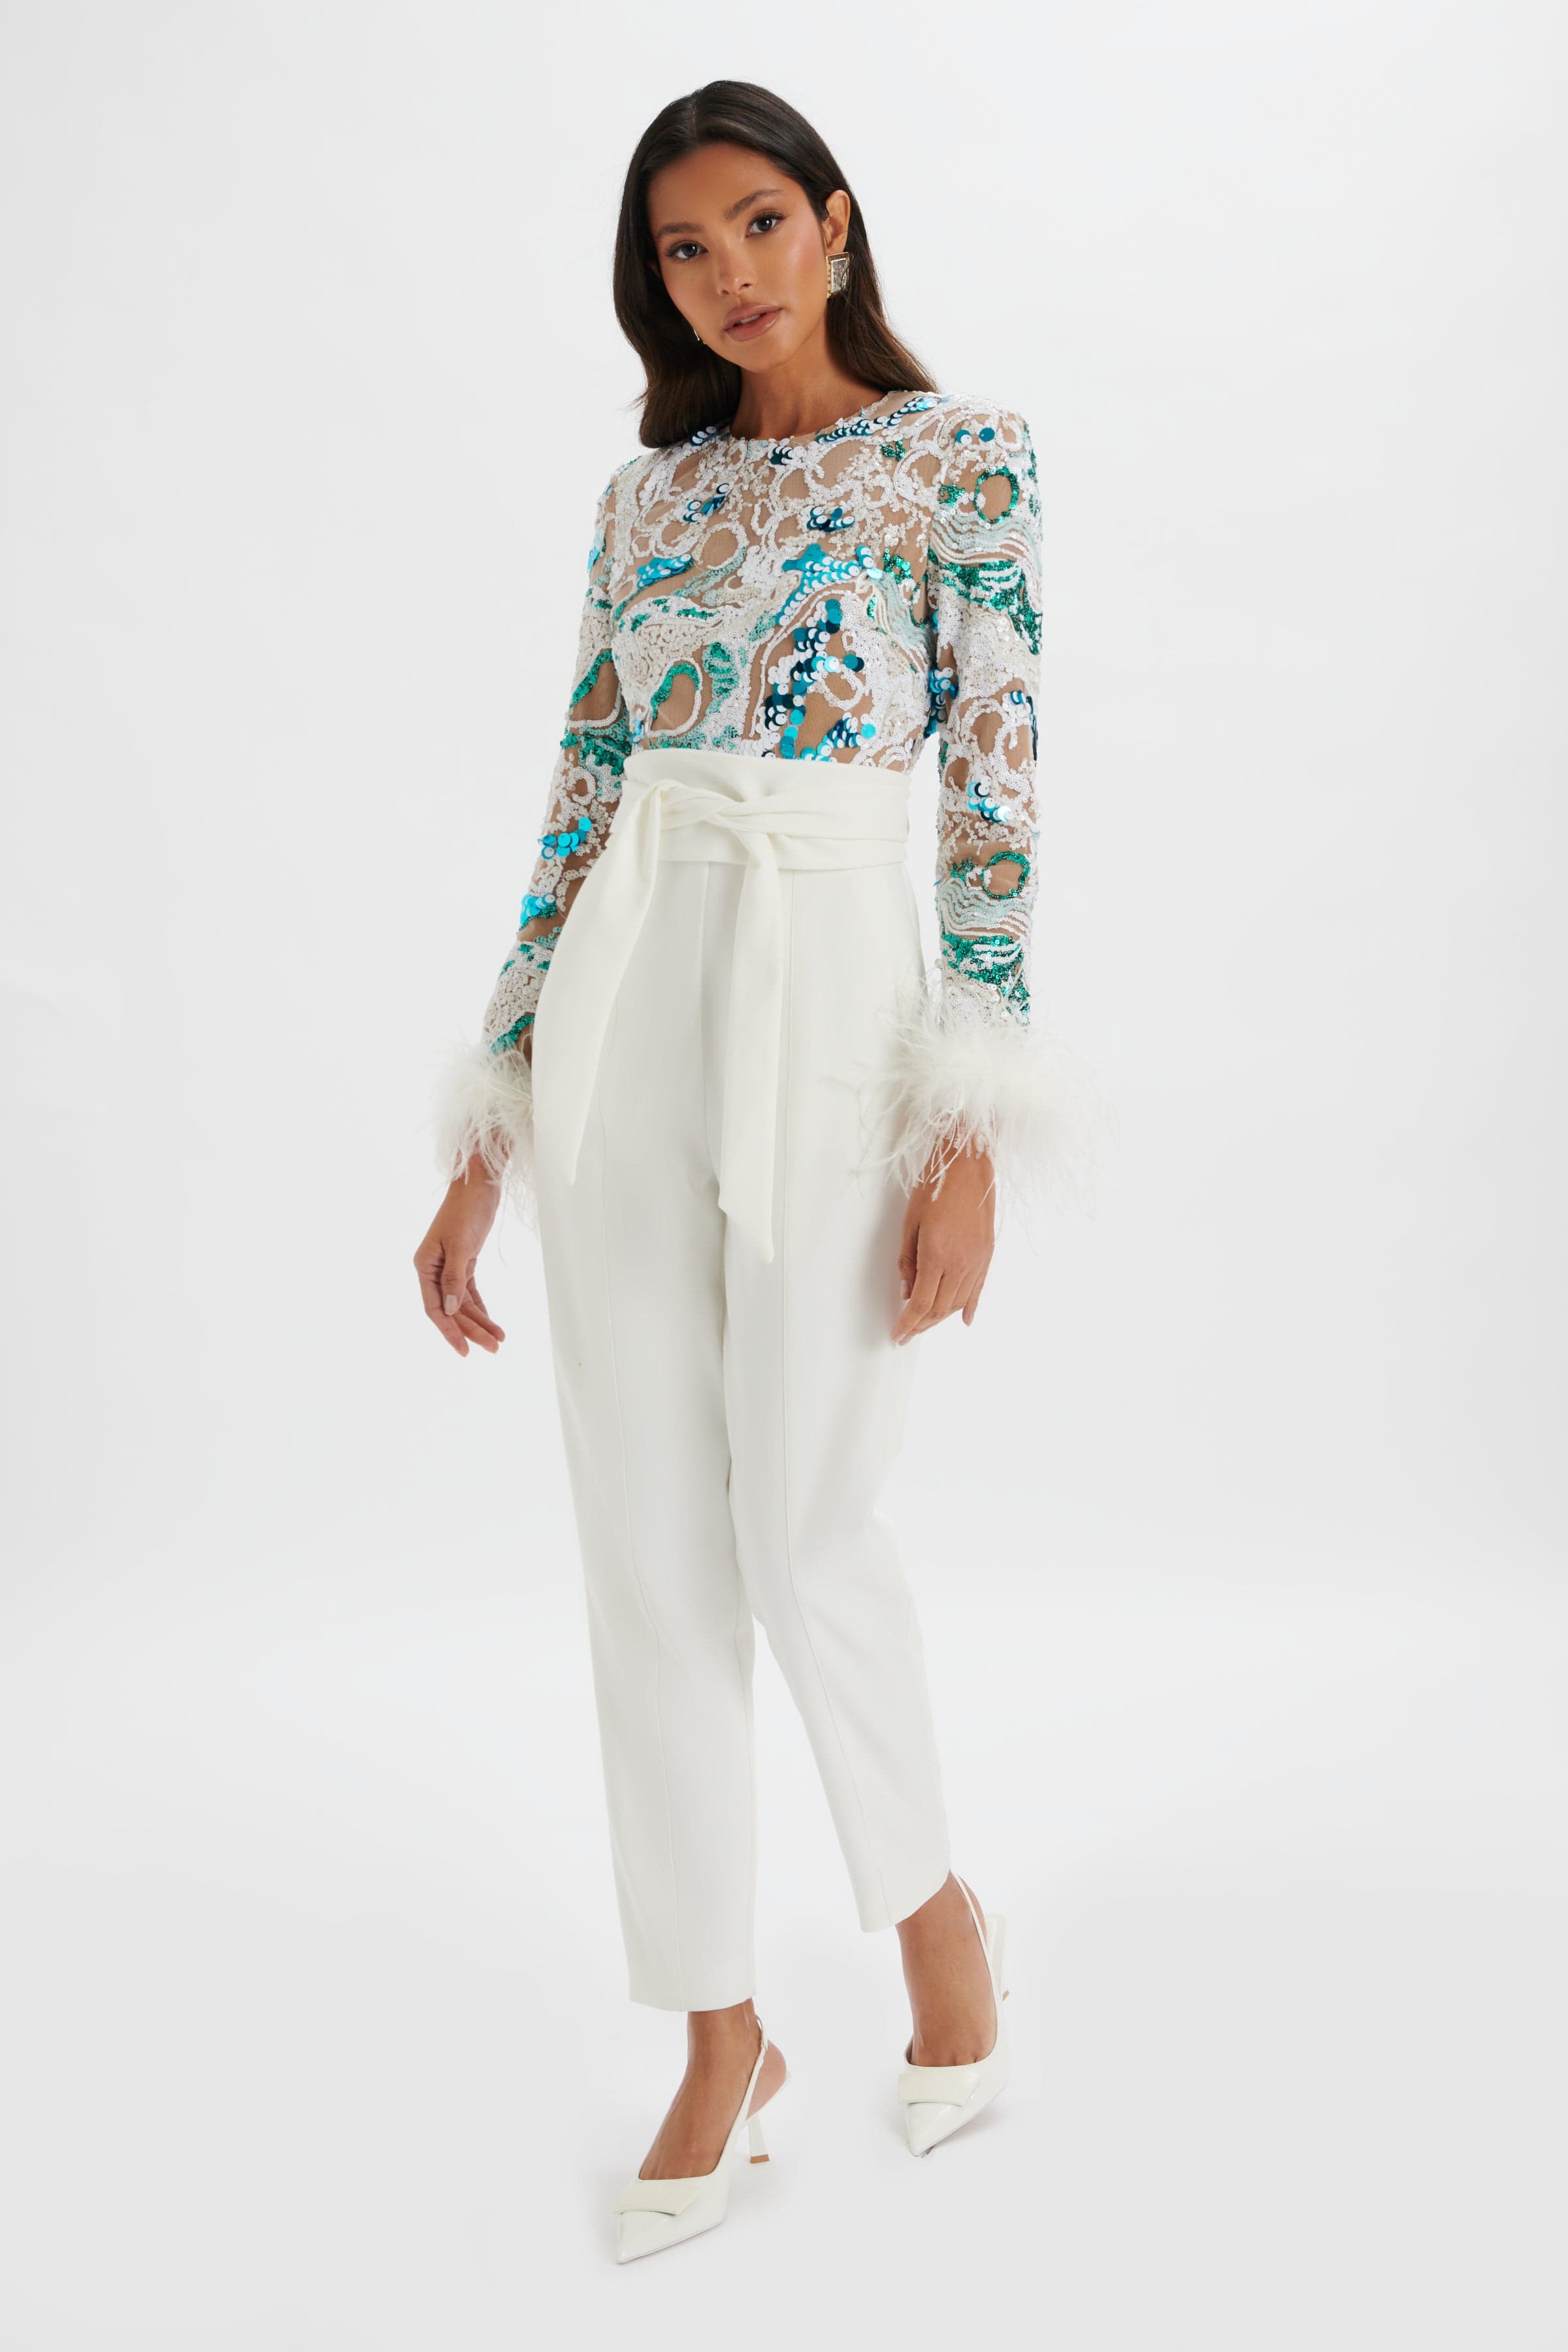 DELIA Embellished Feather Cuff Jumpsuit in White